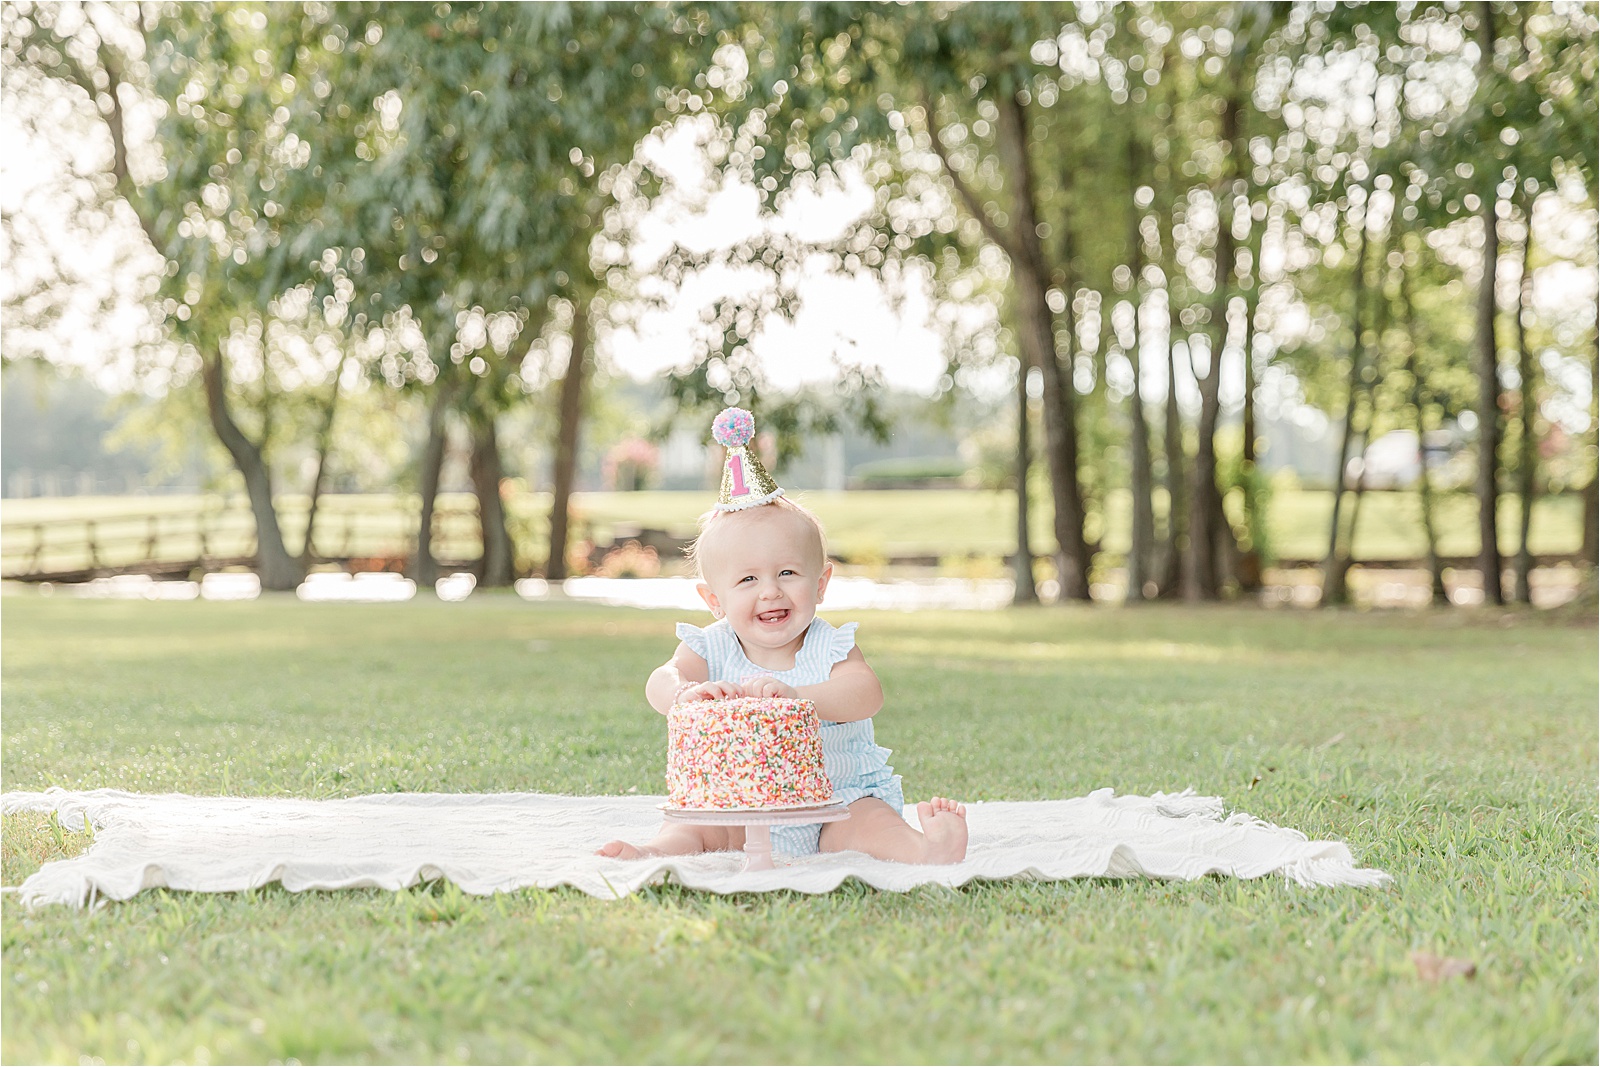 Baby girl with 1 party hat and sprinkle birthday cake sitting on blanket in grass